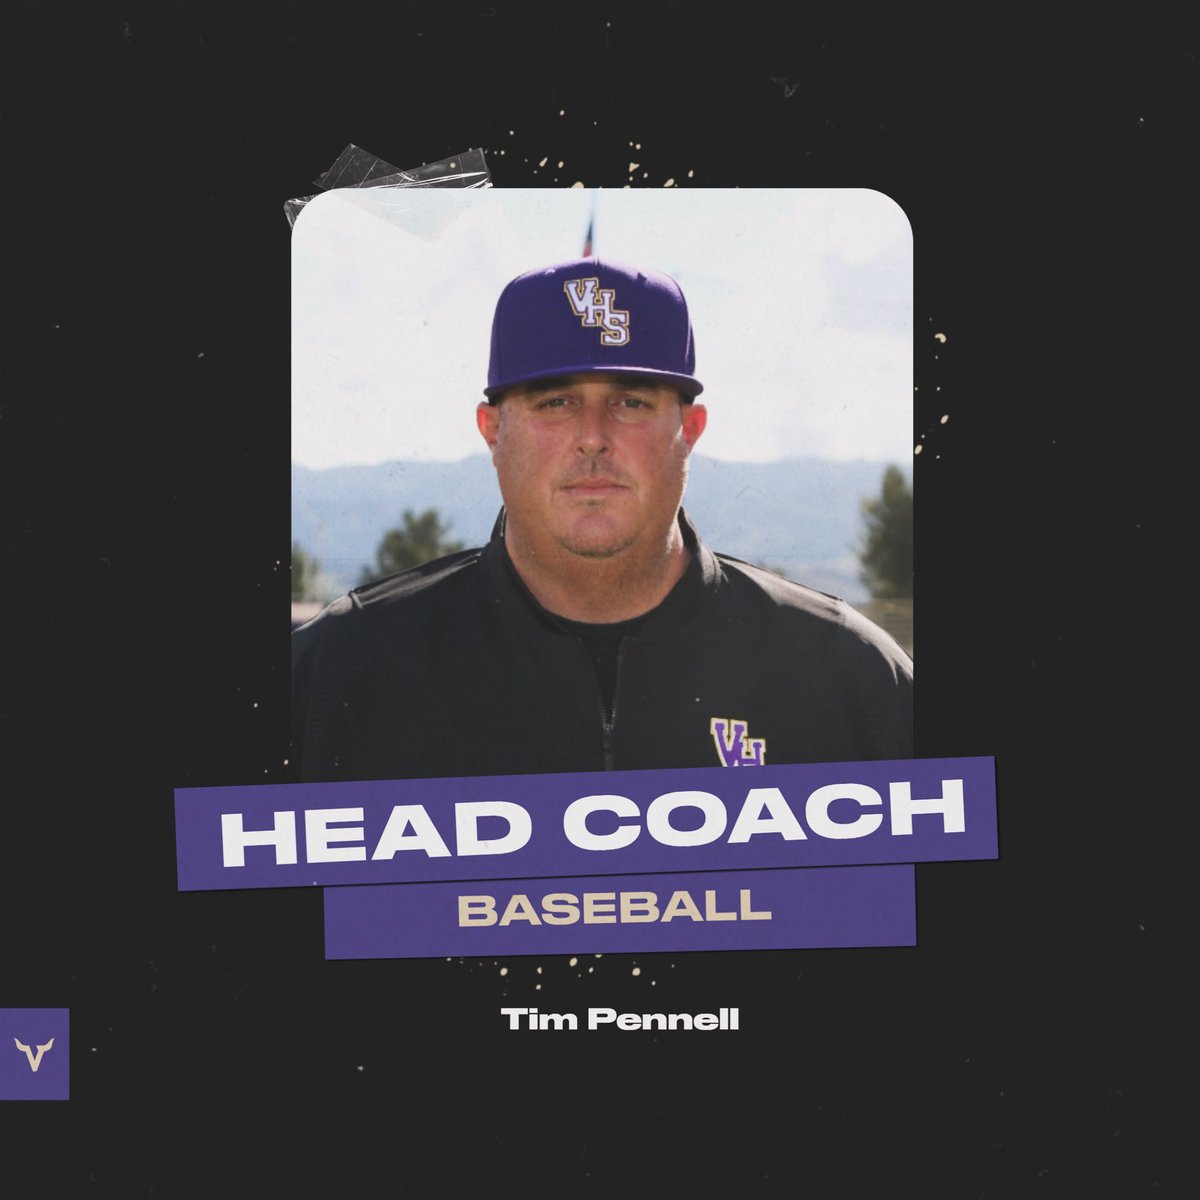 We are excited to announce that Tim Pennell has been named Head Varsity Baseball Coach! Well-liked and respected as an assistant coach, Coach Pennell takes over as the fifth head coach in our program’s history. #GoVikings🤘